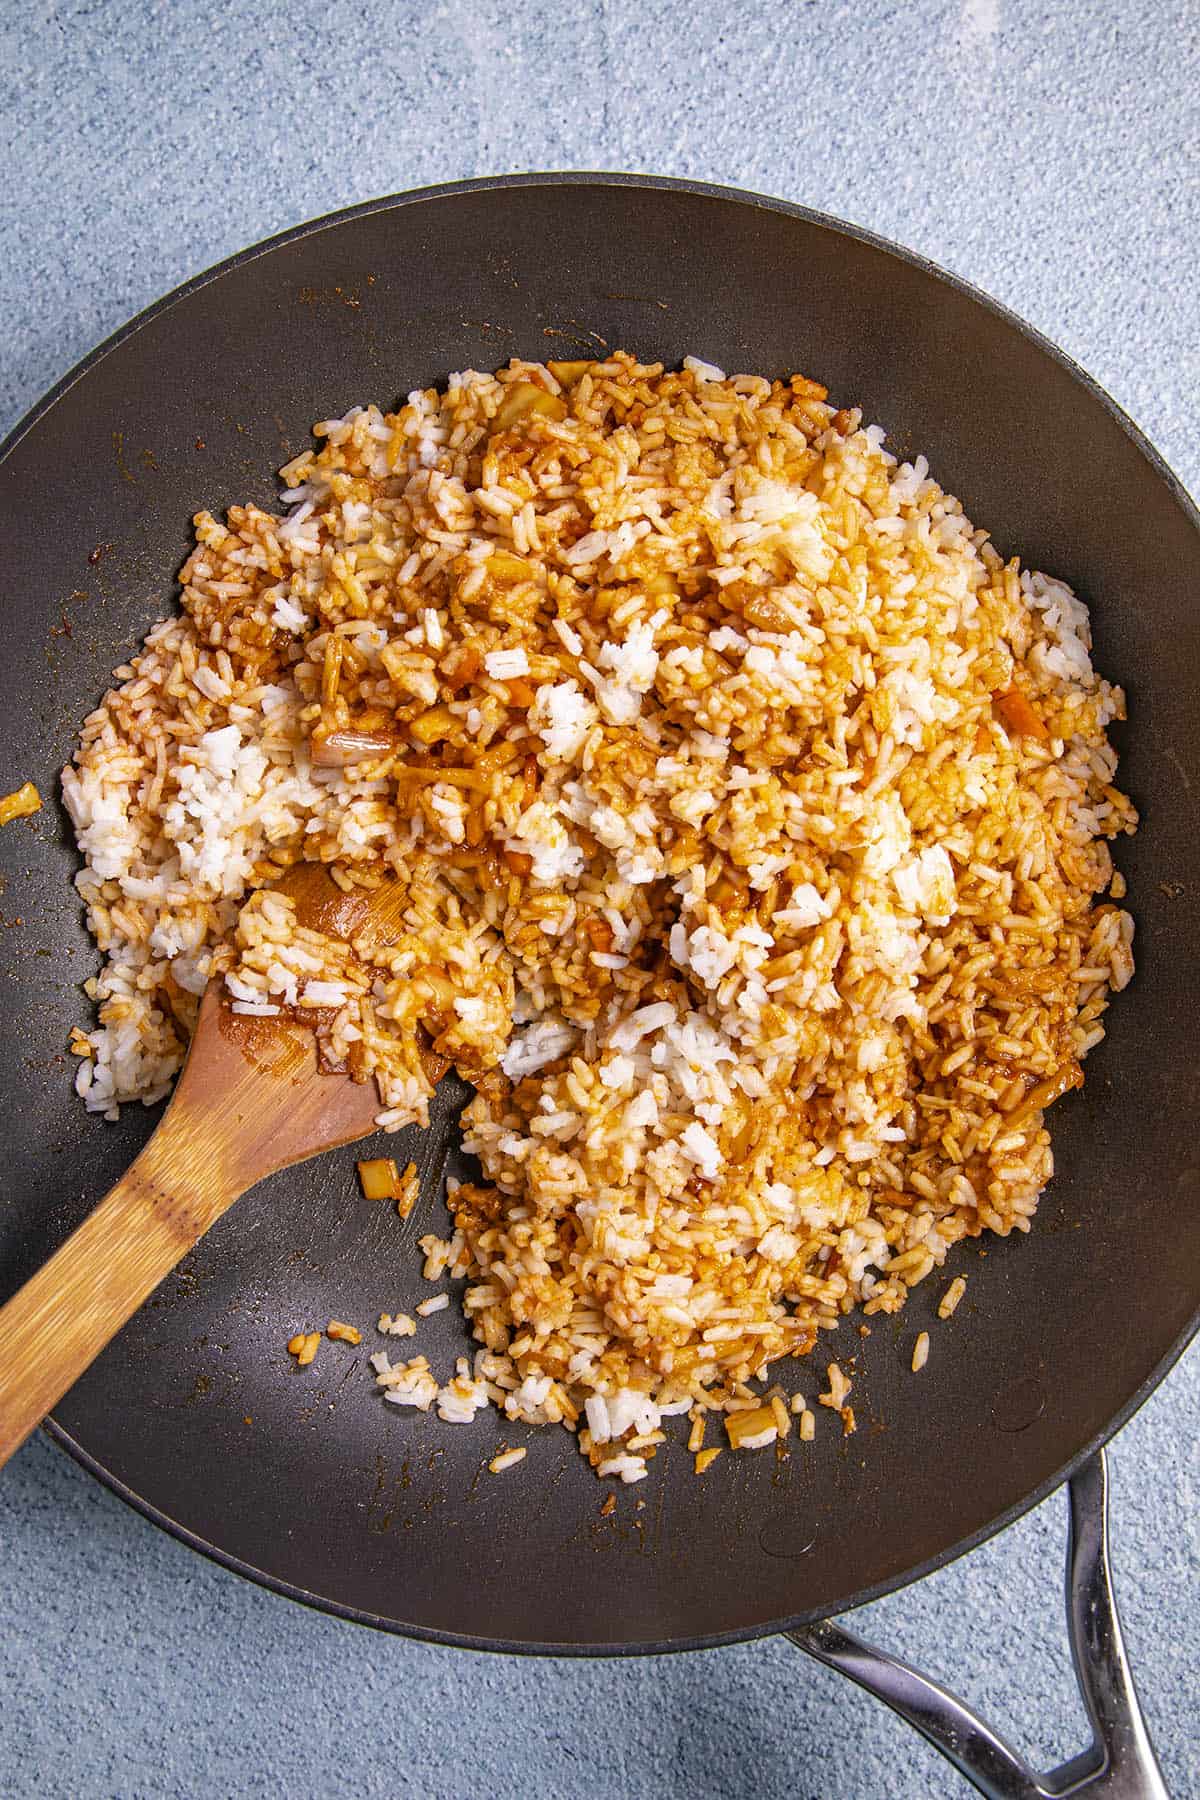 Stirring the sauce into the kimchi fried rice in a hot pan